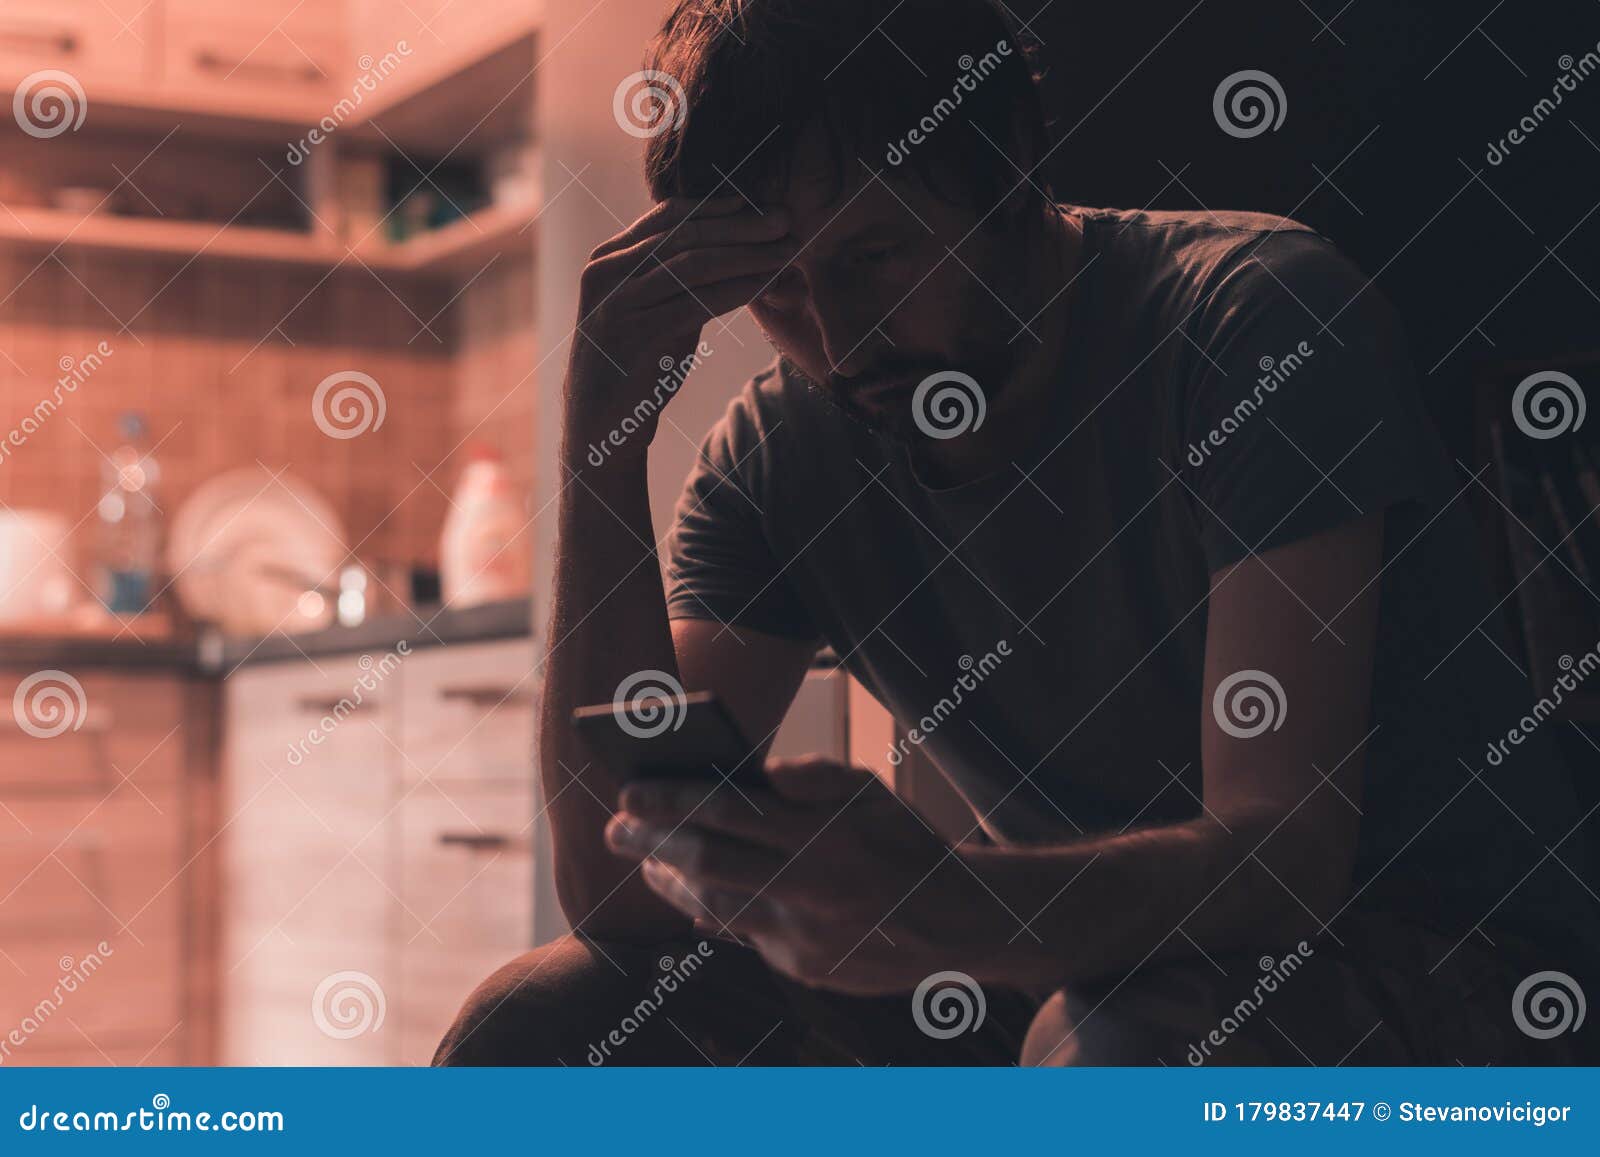 depressed man typing text message on mobile phone in dark room